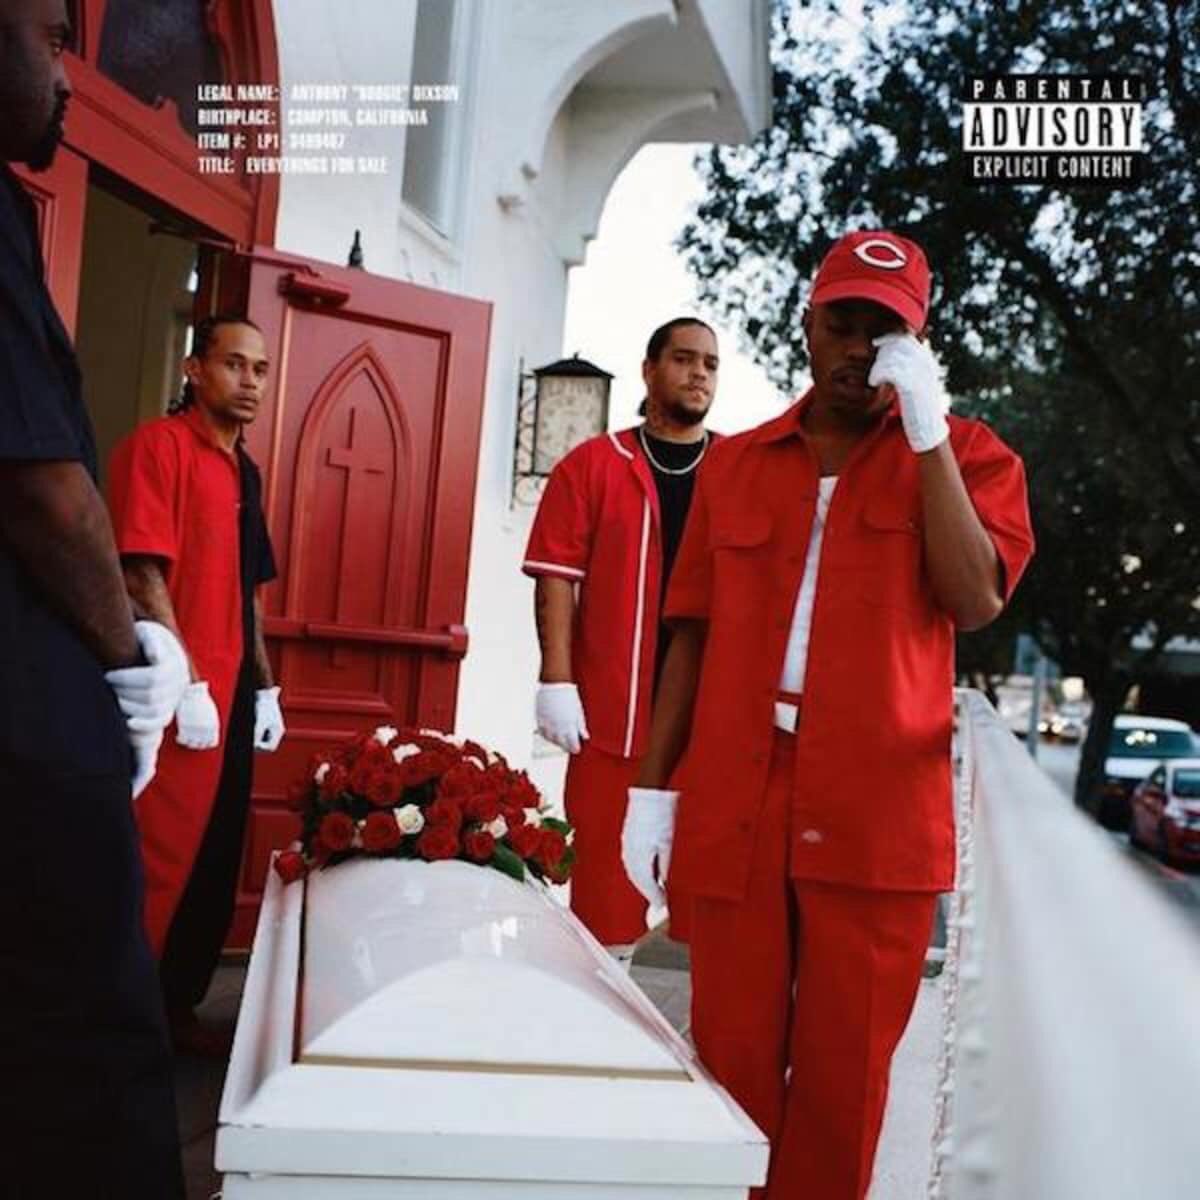 I left my legacy hurt?
Fuckin' absurd 

Like a shepherd havin' sex with his sheep
Fuck what you “herd” 👀🔥

Go check out Eminem’s verse on “Rainy Days.” Congrats to @WS_Boogie on dropping an incredible debut album! #EVERYTHINGSFORSALE